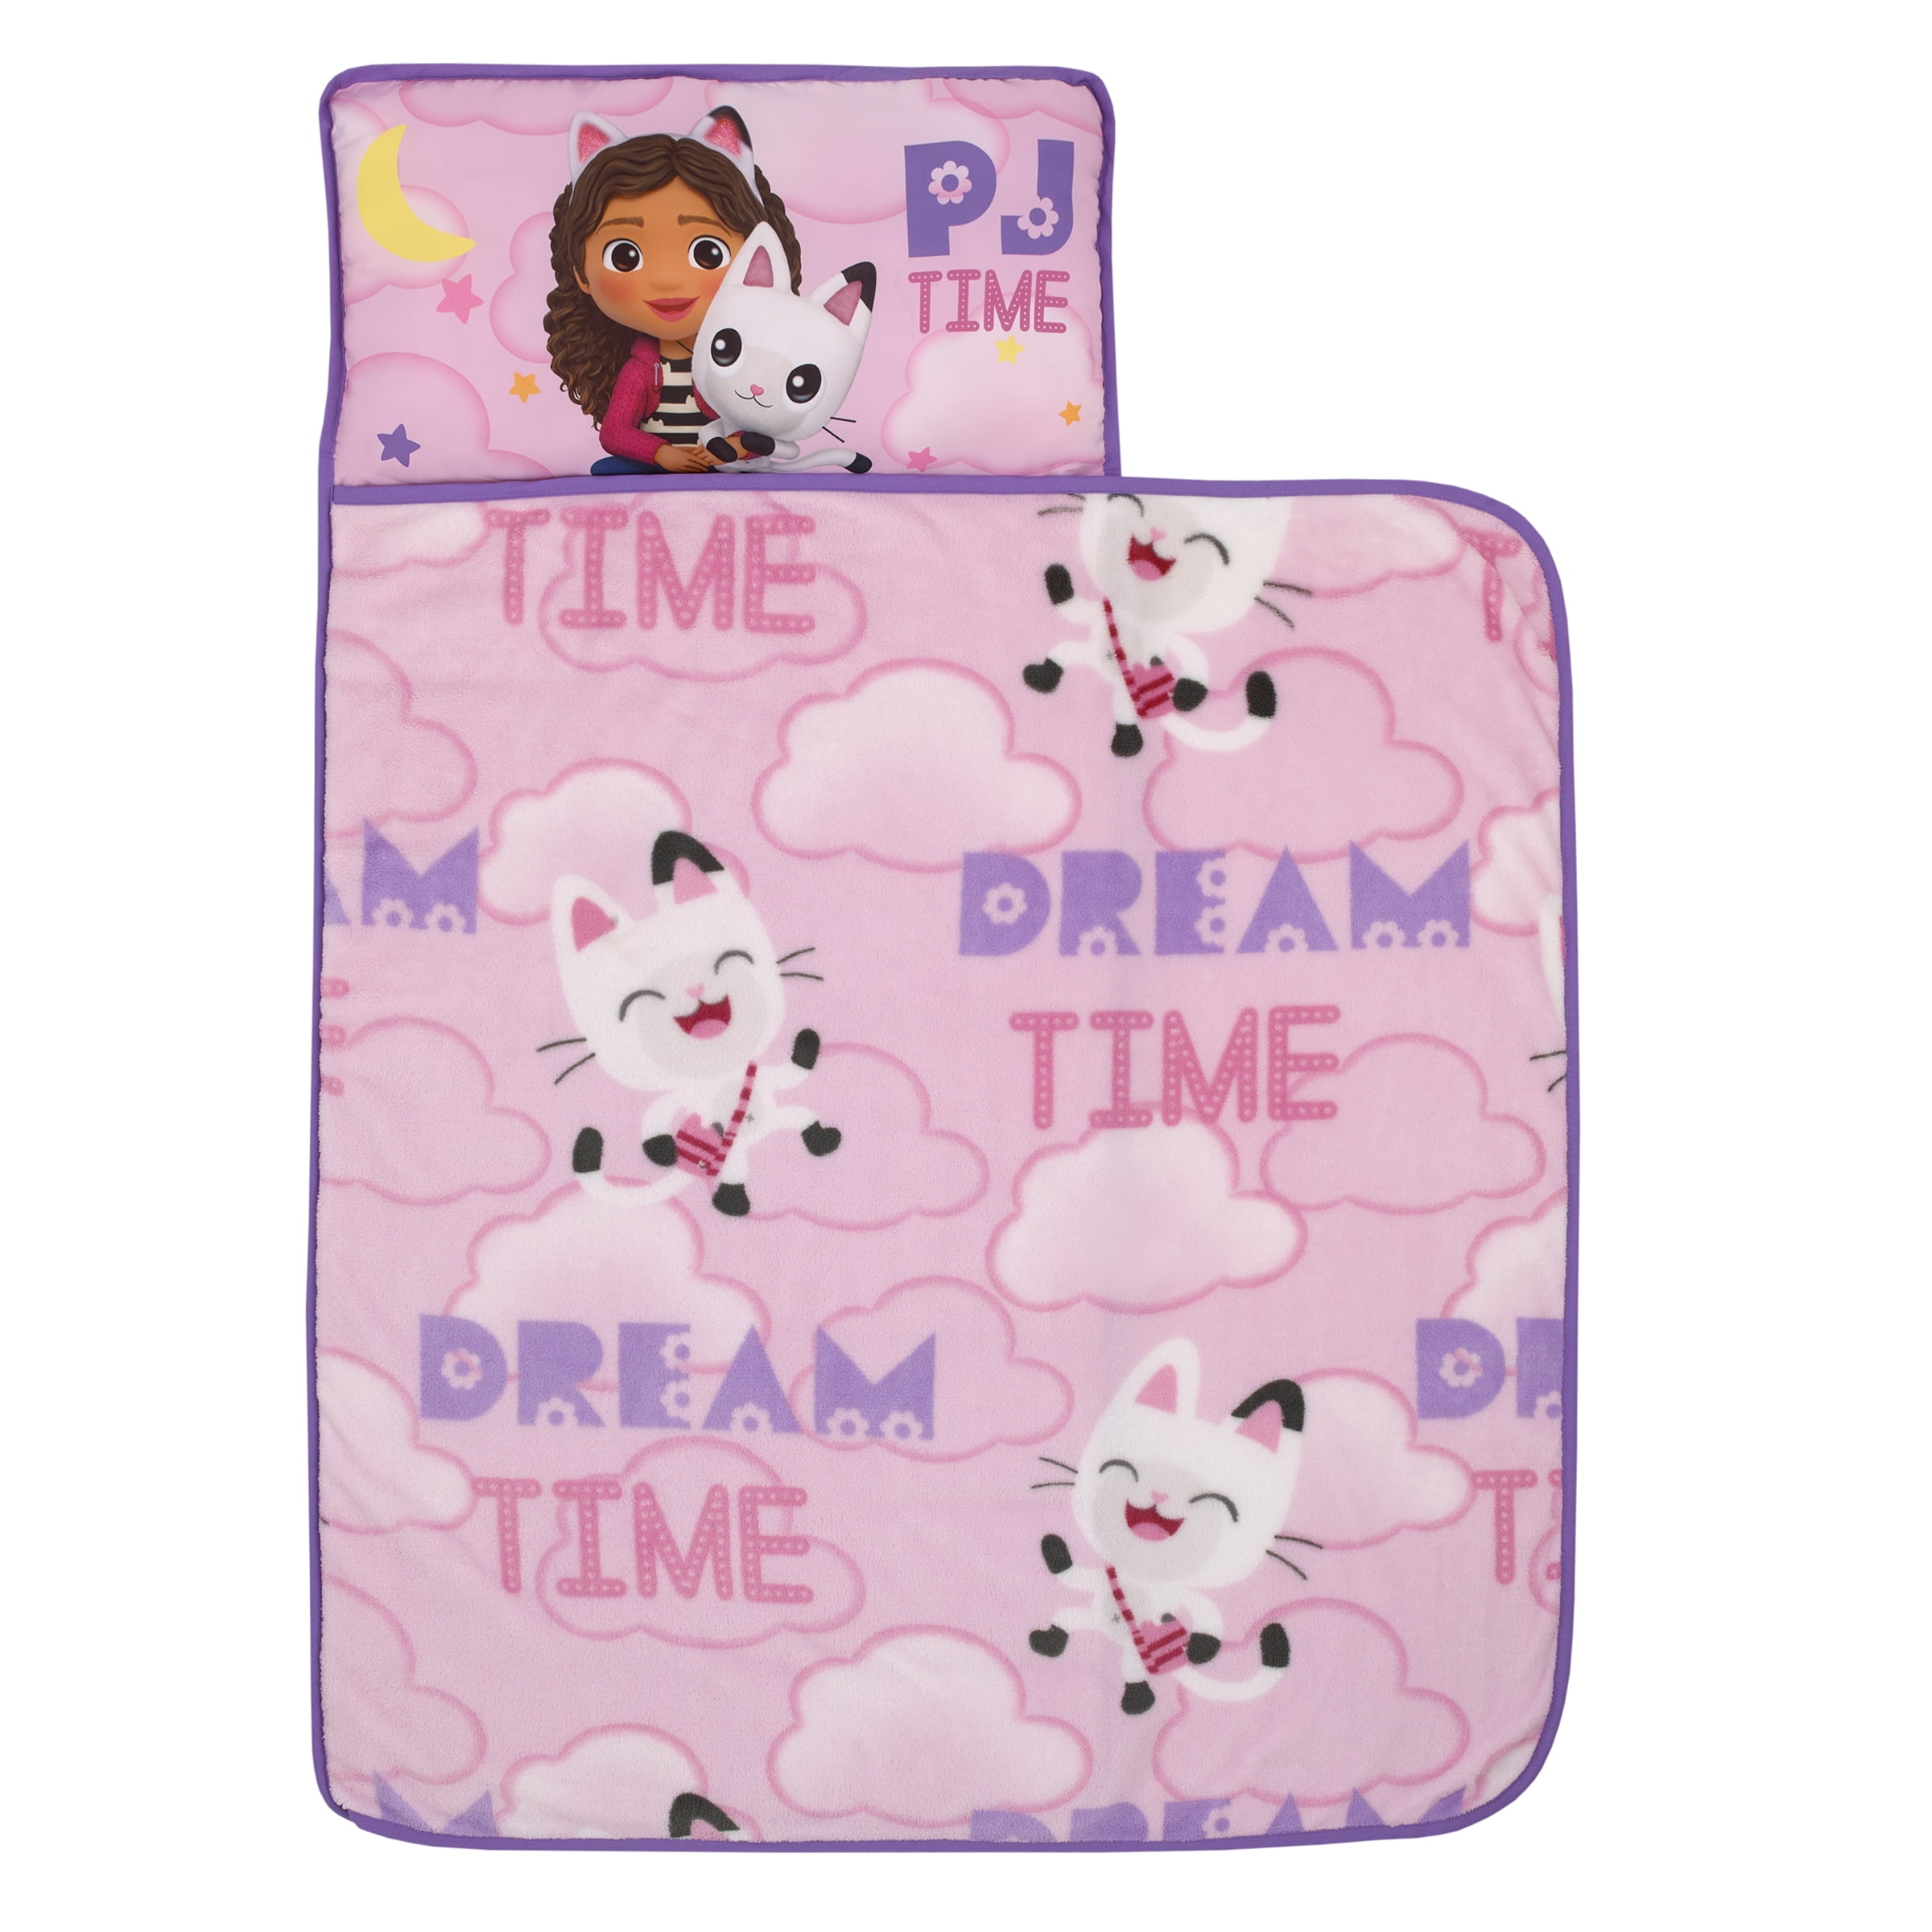 Cartoon Cat Paw Rug - Black - Pink - Purple - Gray - Step into a World of  Comfort - 1ST Missing Piece